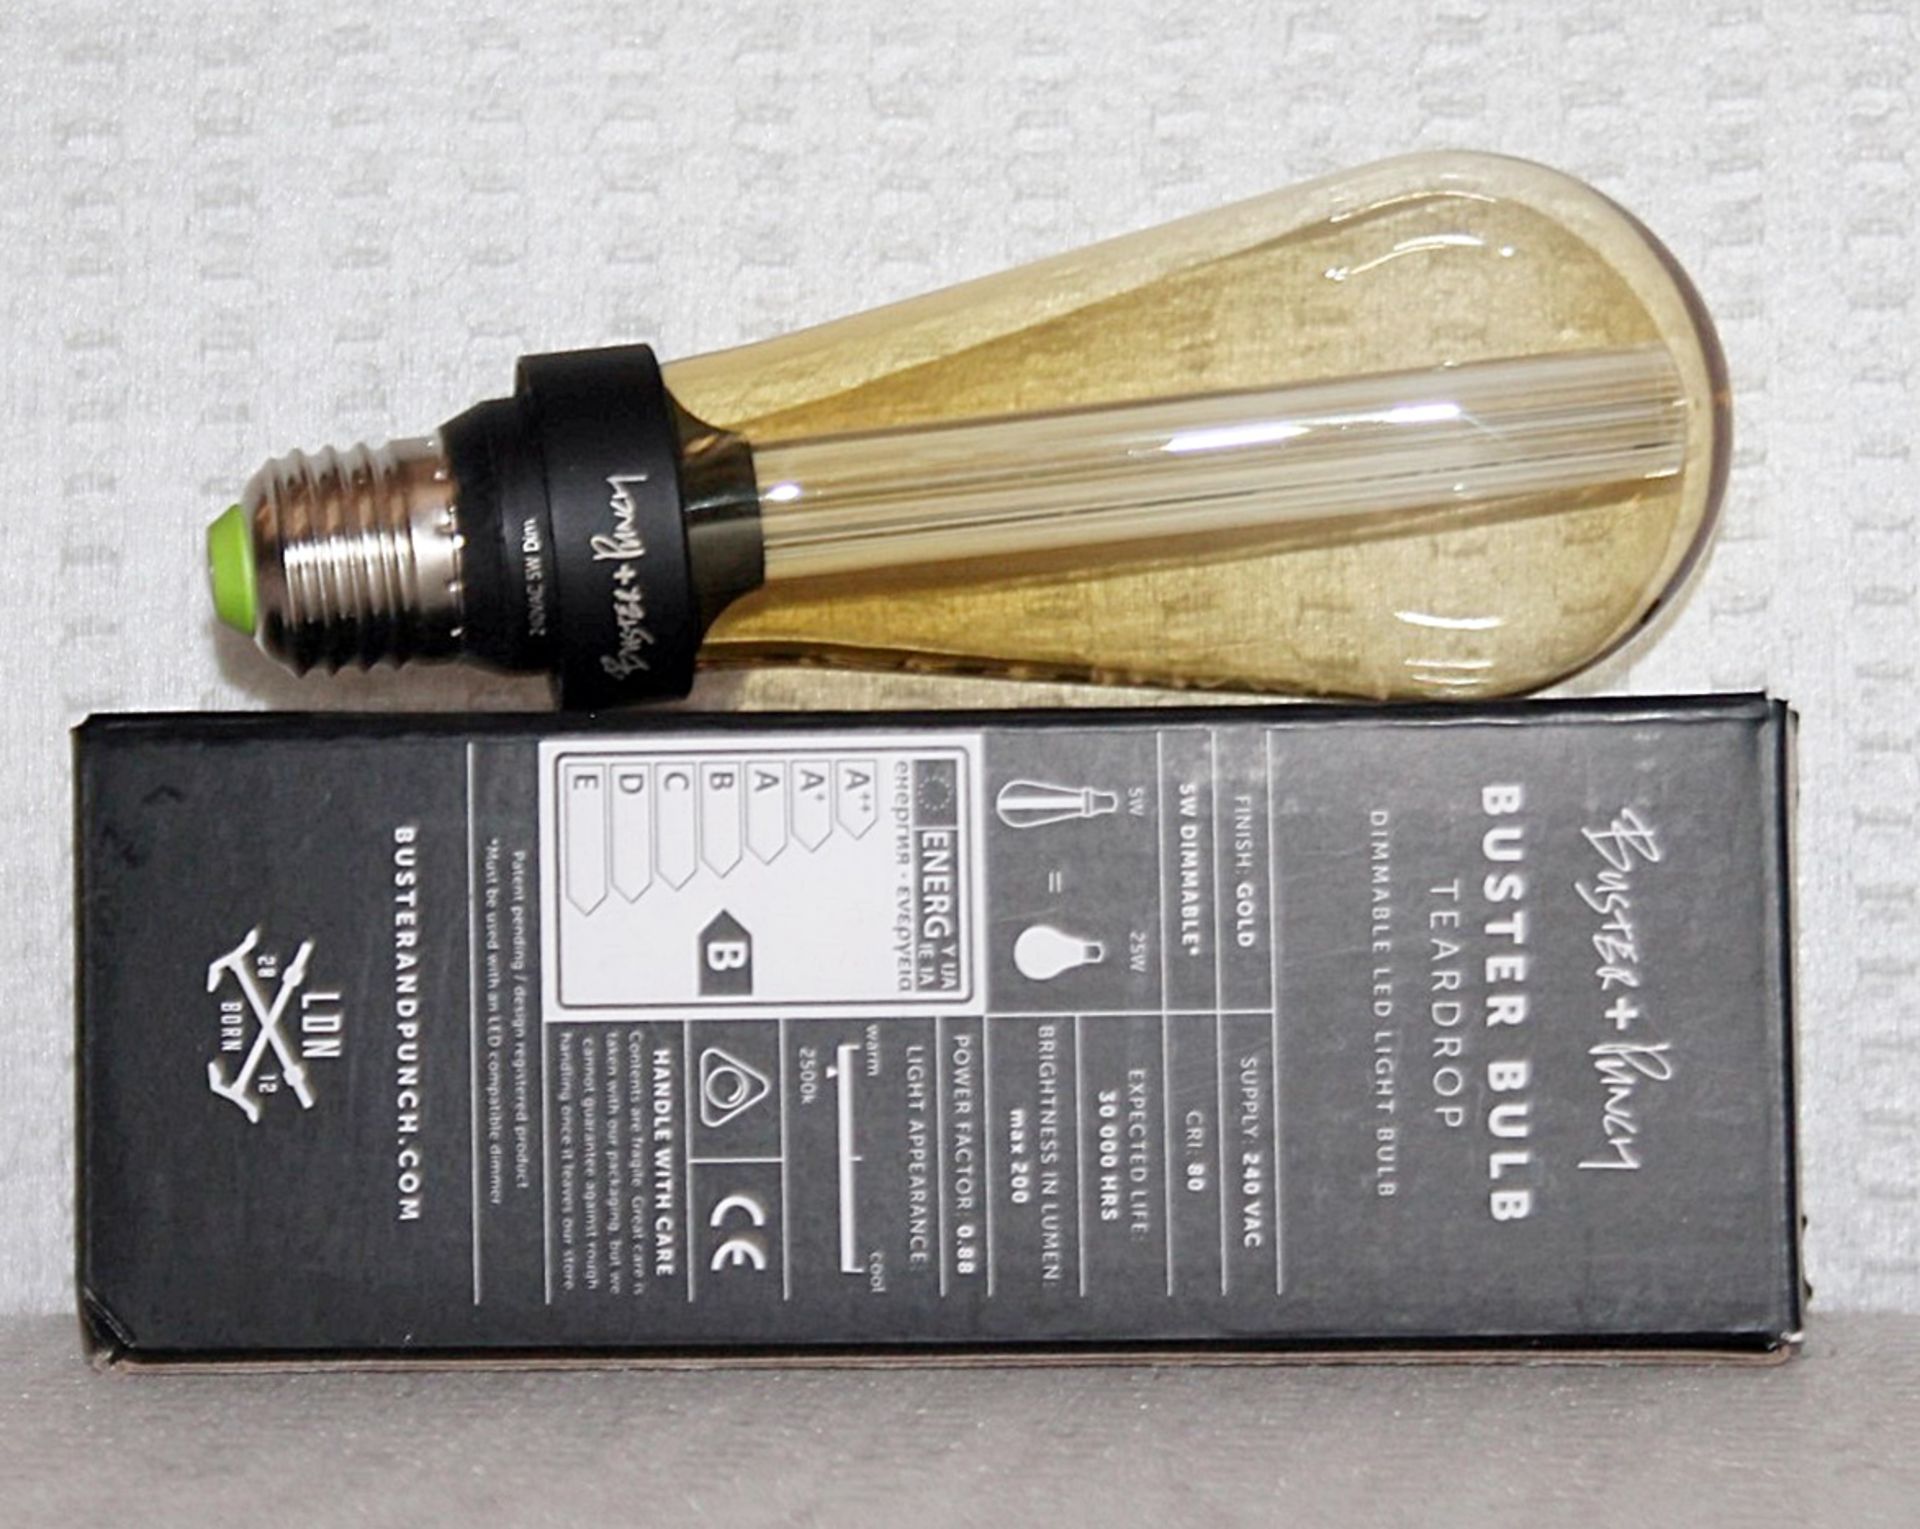 2 x BUSTER + PUNCH Designer Dimmable 'Teardrop' E27 Light Bulbs (Gold) - Total Original Price £69.98 - Image 3 of 10